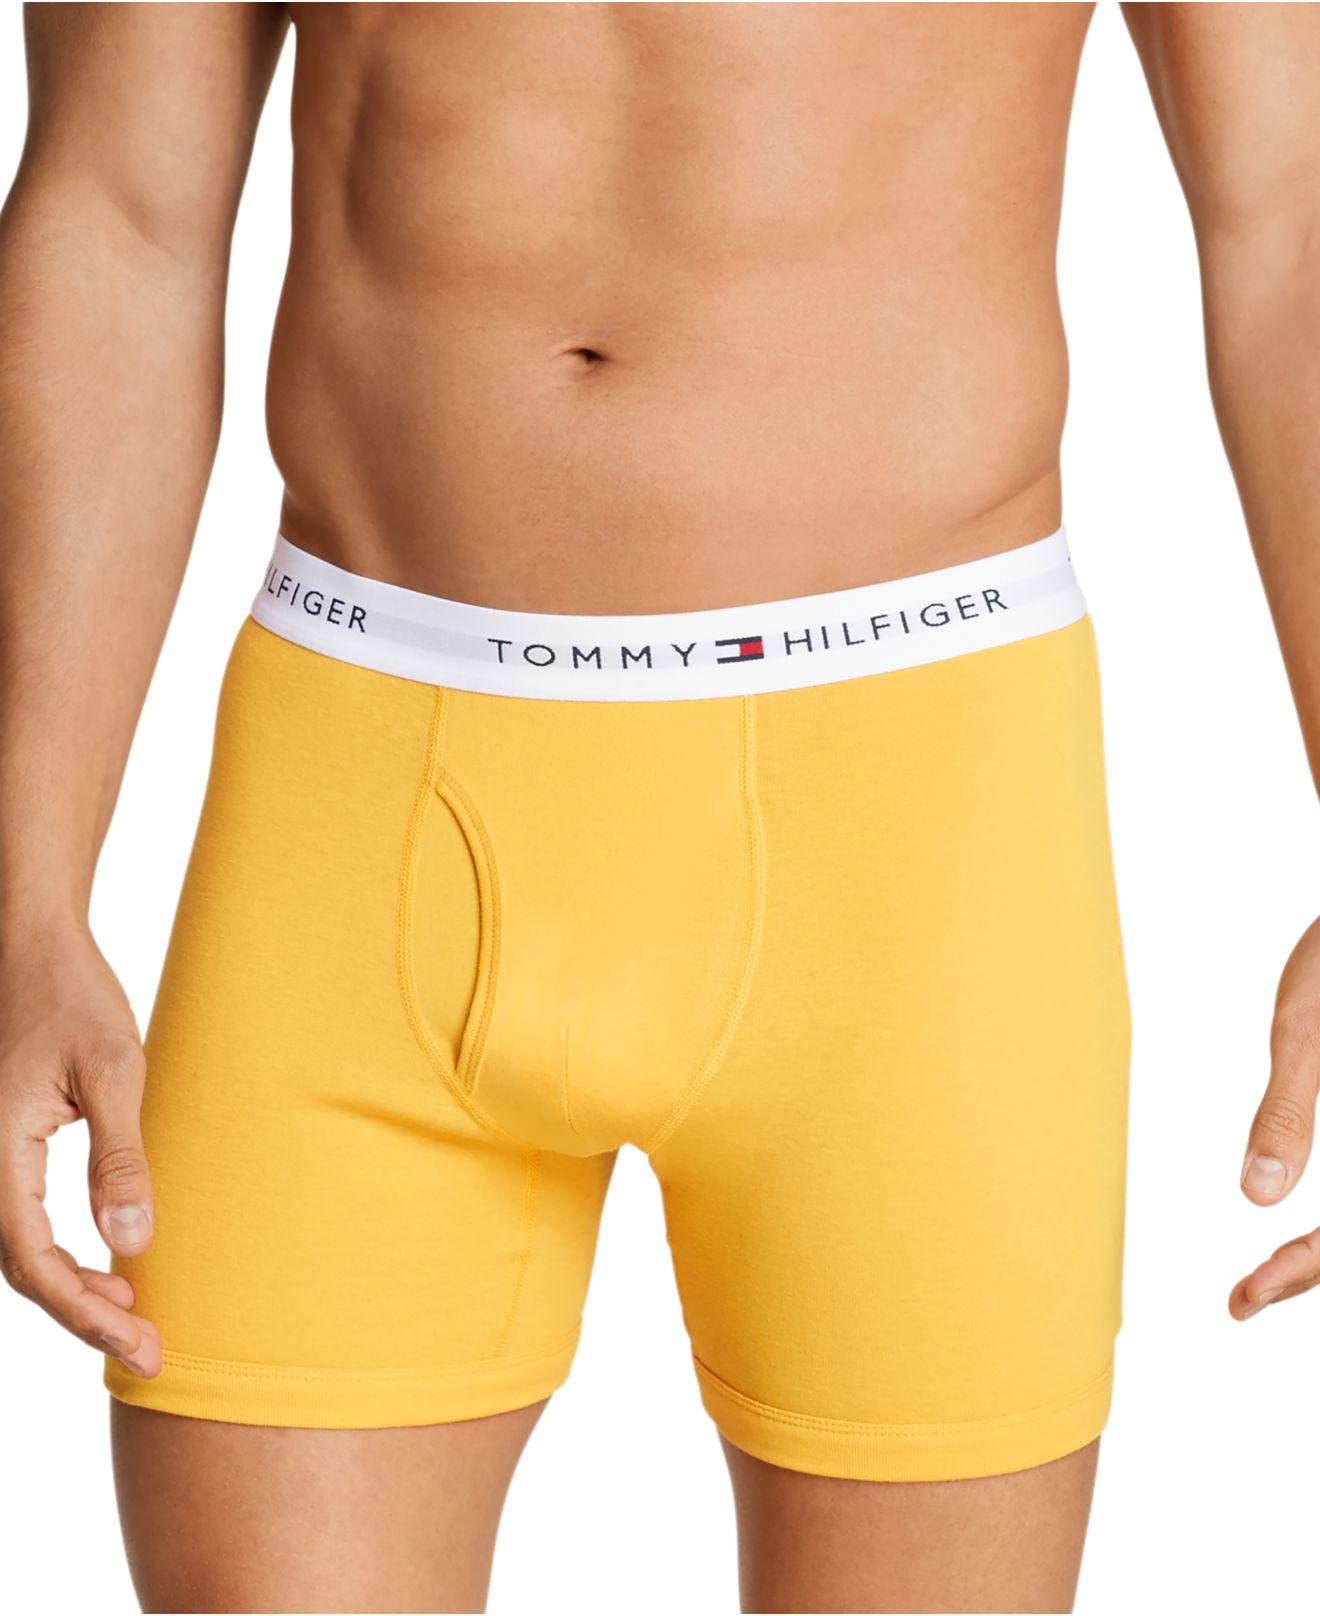 Tommy Hilfiger 5-pk. Cotton Classics Boxer Briefs in Yellow for Men